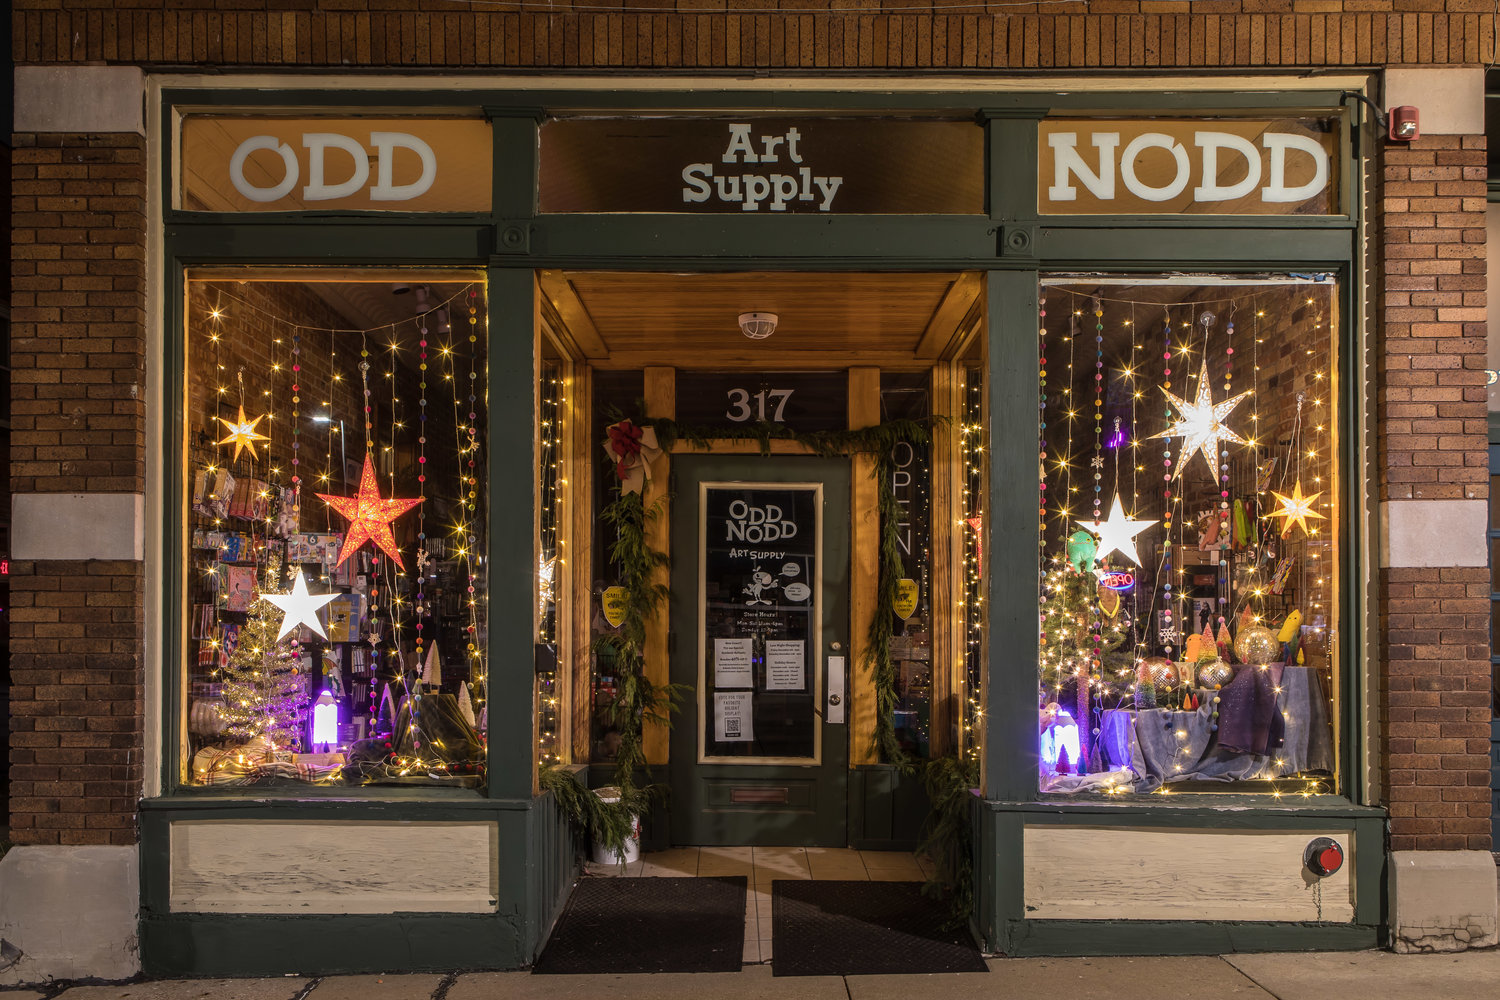 “Decorating for Christmas is a tradition in my family. We’re trying to bring that same neighborhood experience to our business and Old Town”, said Whitney Sowers, co-owner of Odd Nod Art Supply.